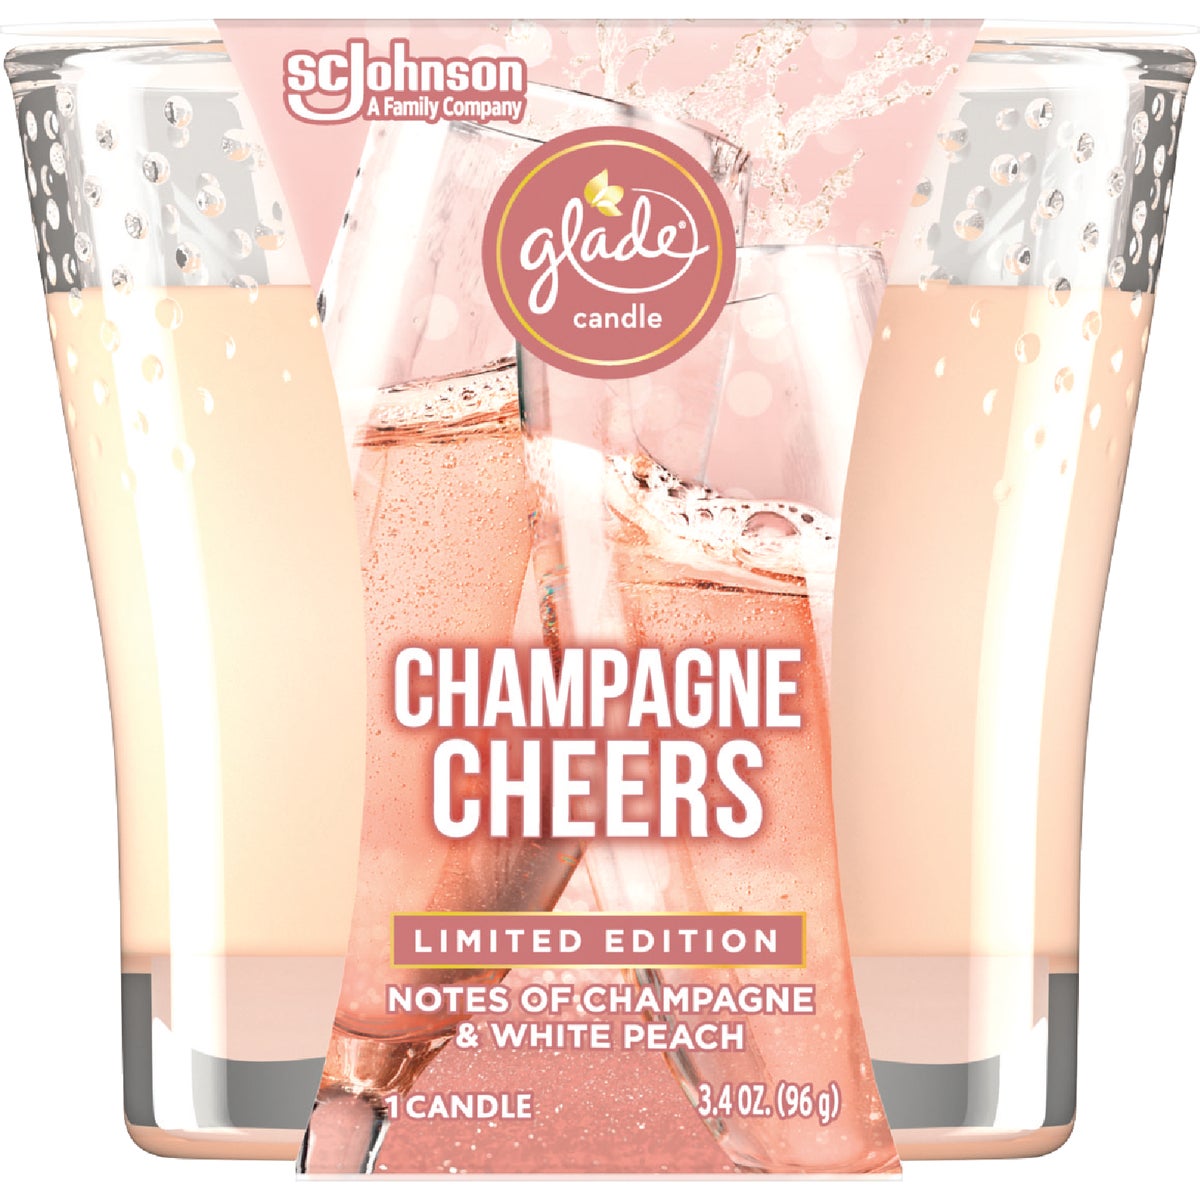 Glade 3.4 Oz. Champagne Cheers Candle